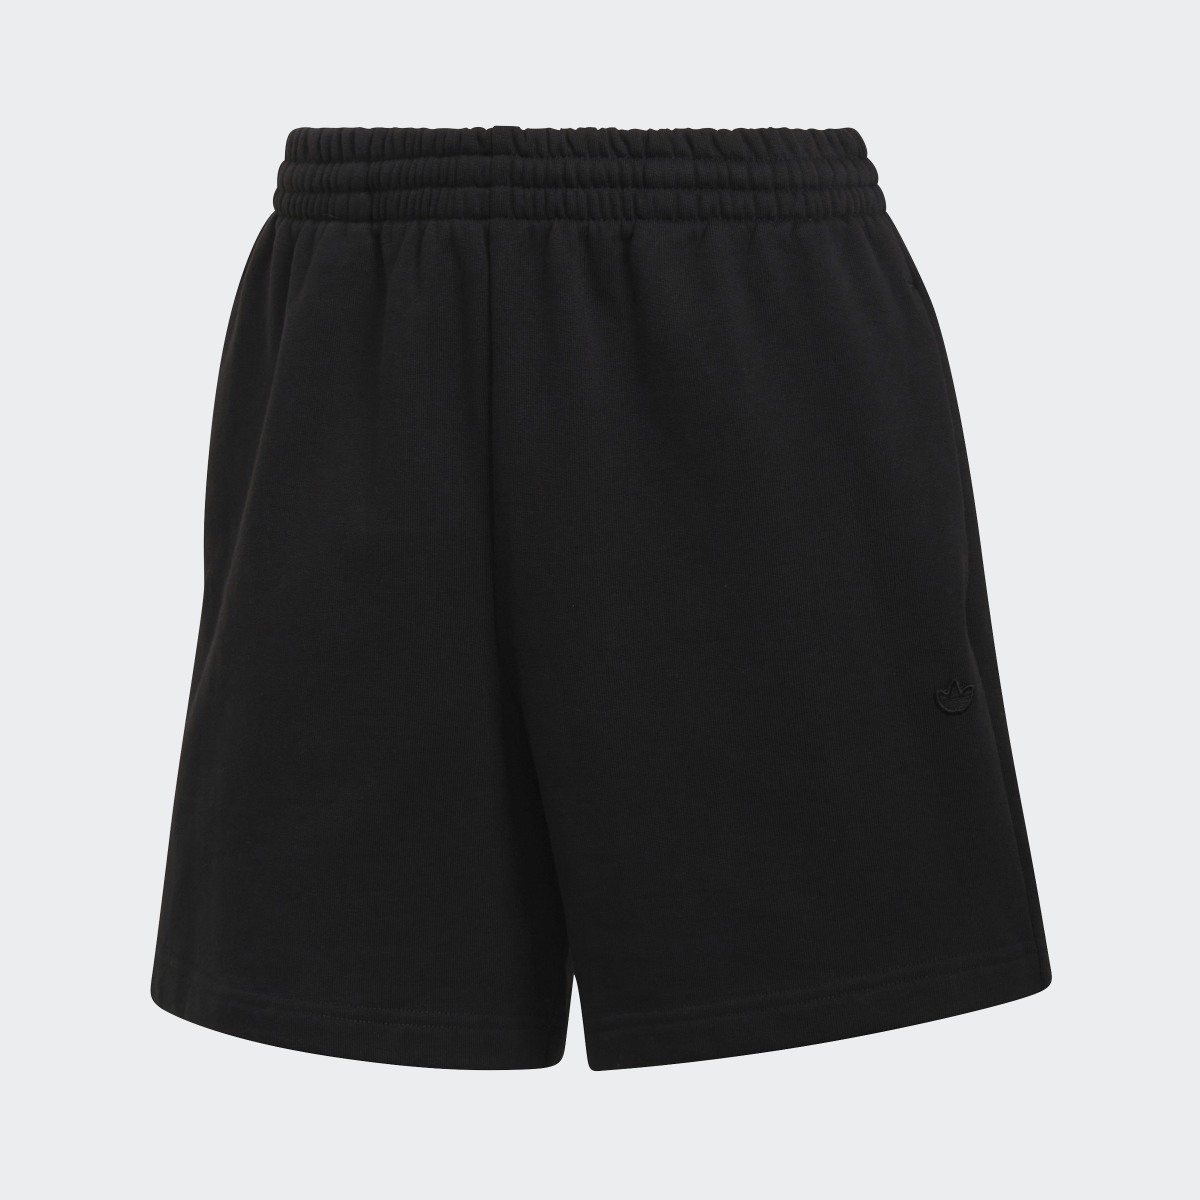 Adidas Adicolor French Terry Shorts. 5